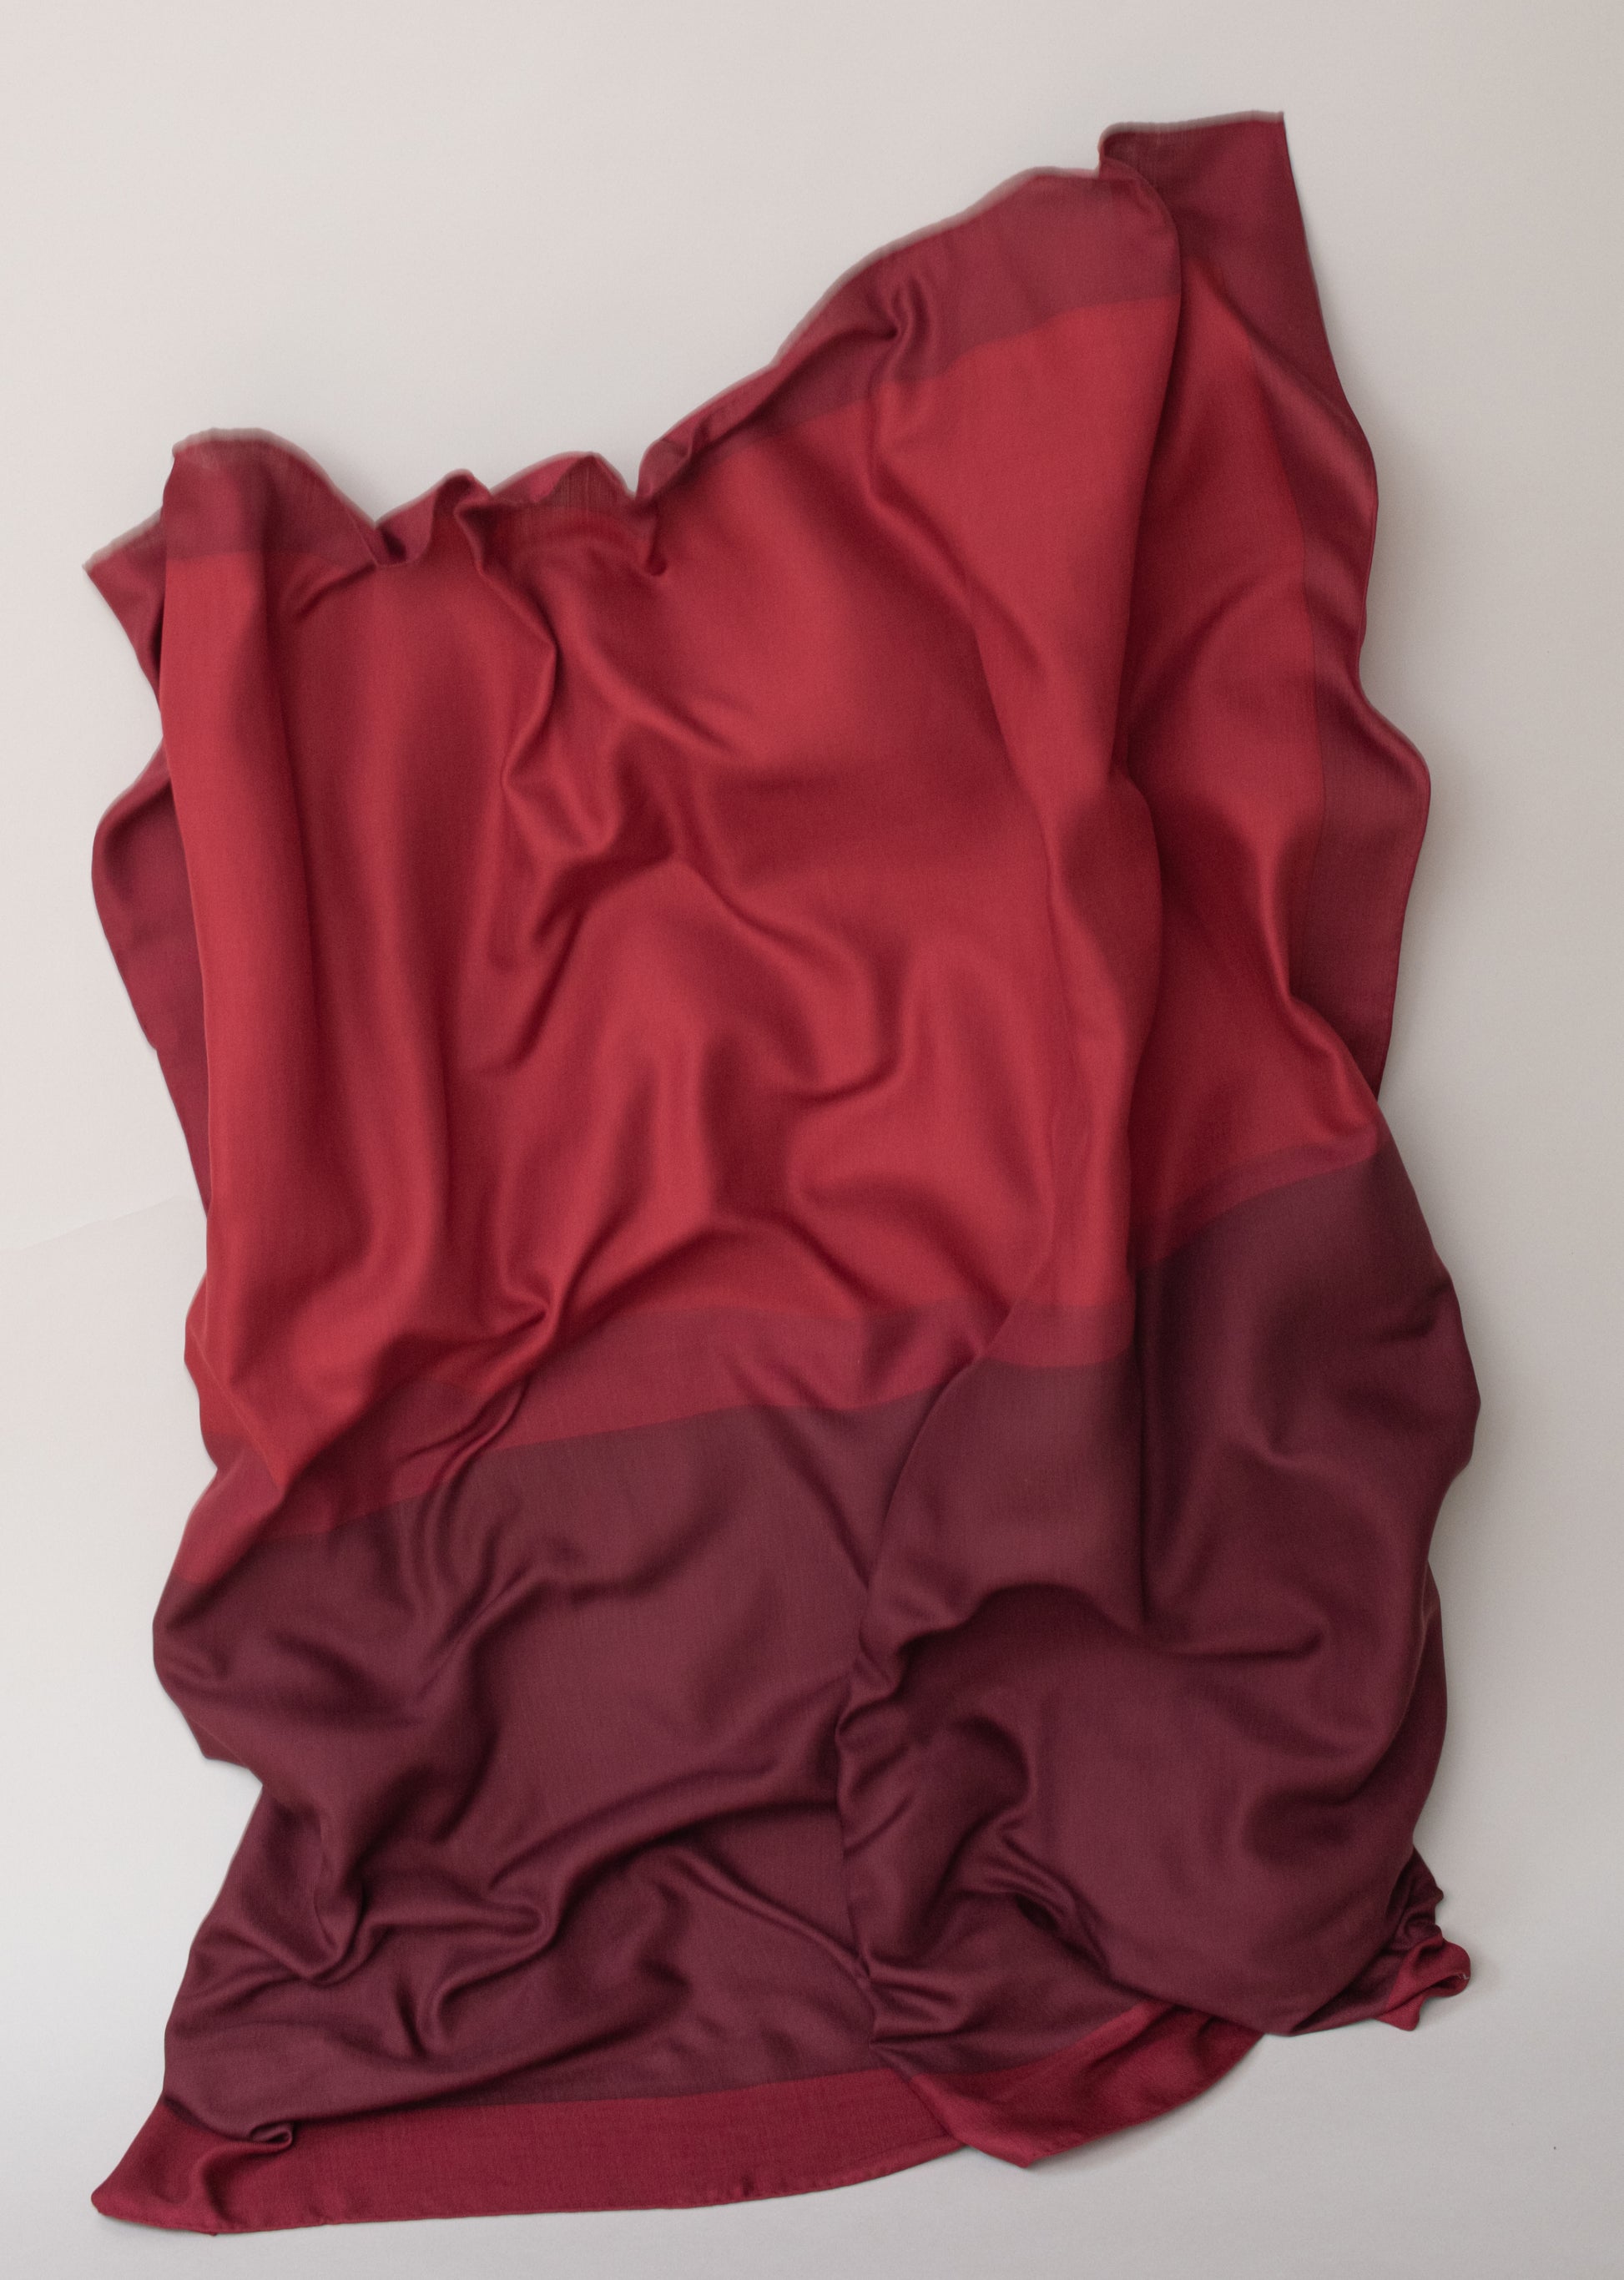 Intonation 01, soft woollen shawl by Alba Amicorum, in red tones, hand rolled hems